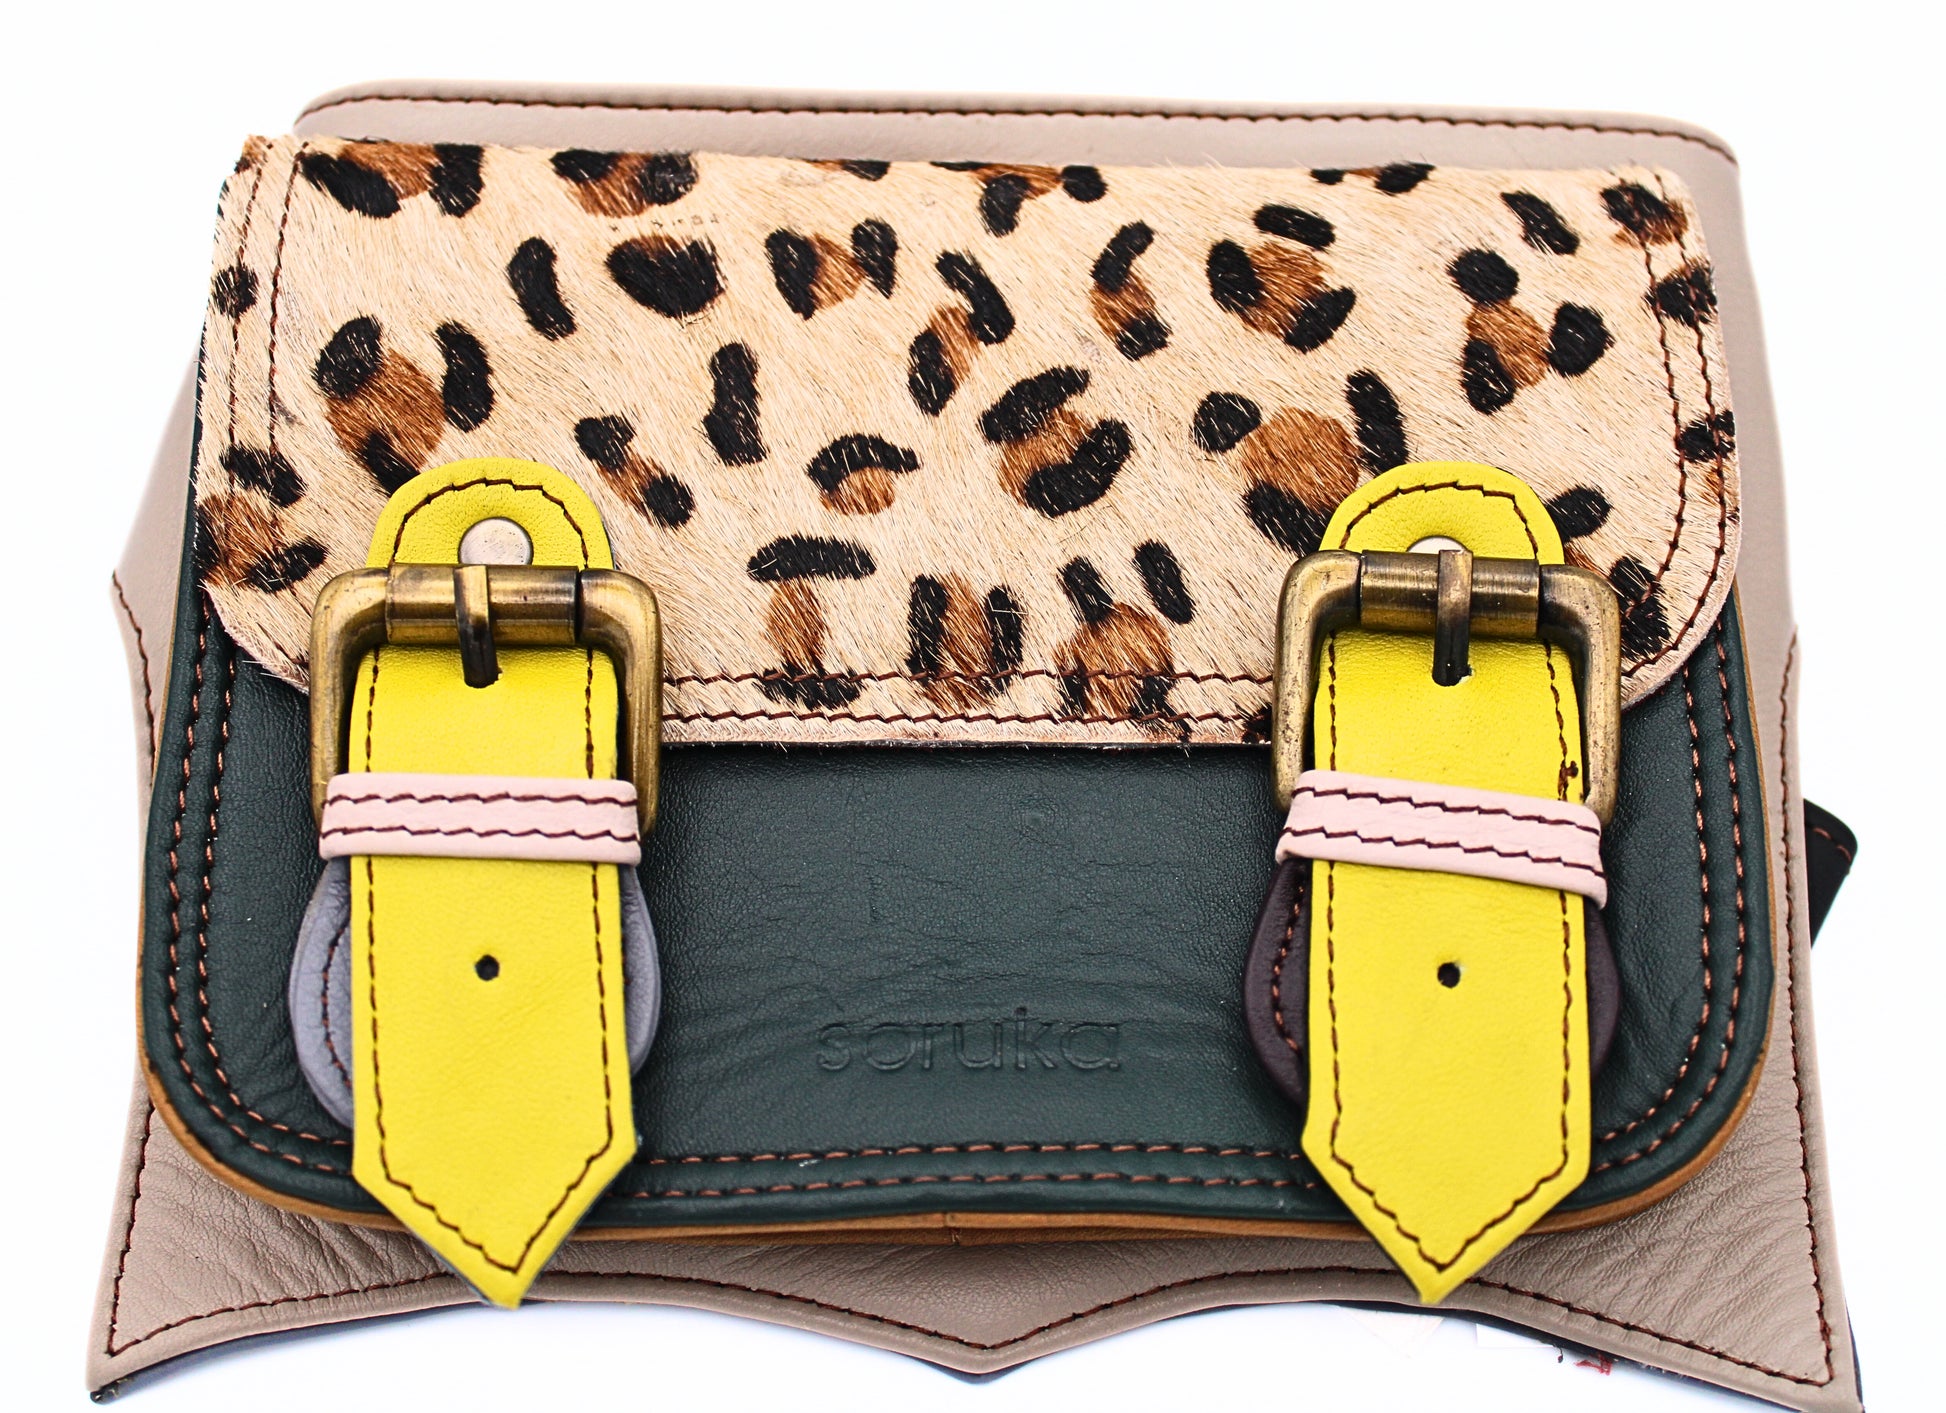 Close up view of Alexis Print Belly Bag in Animal Print and Green Leather